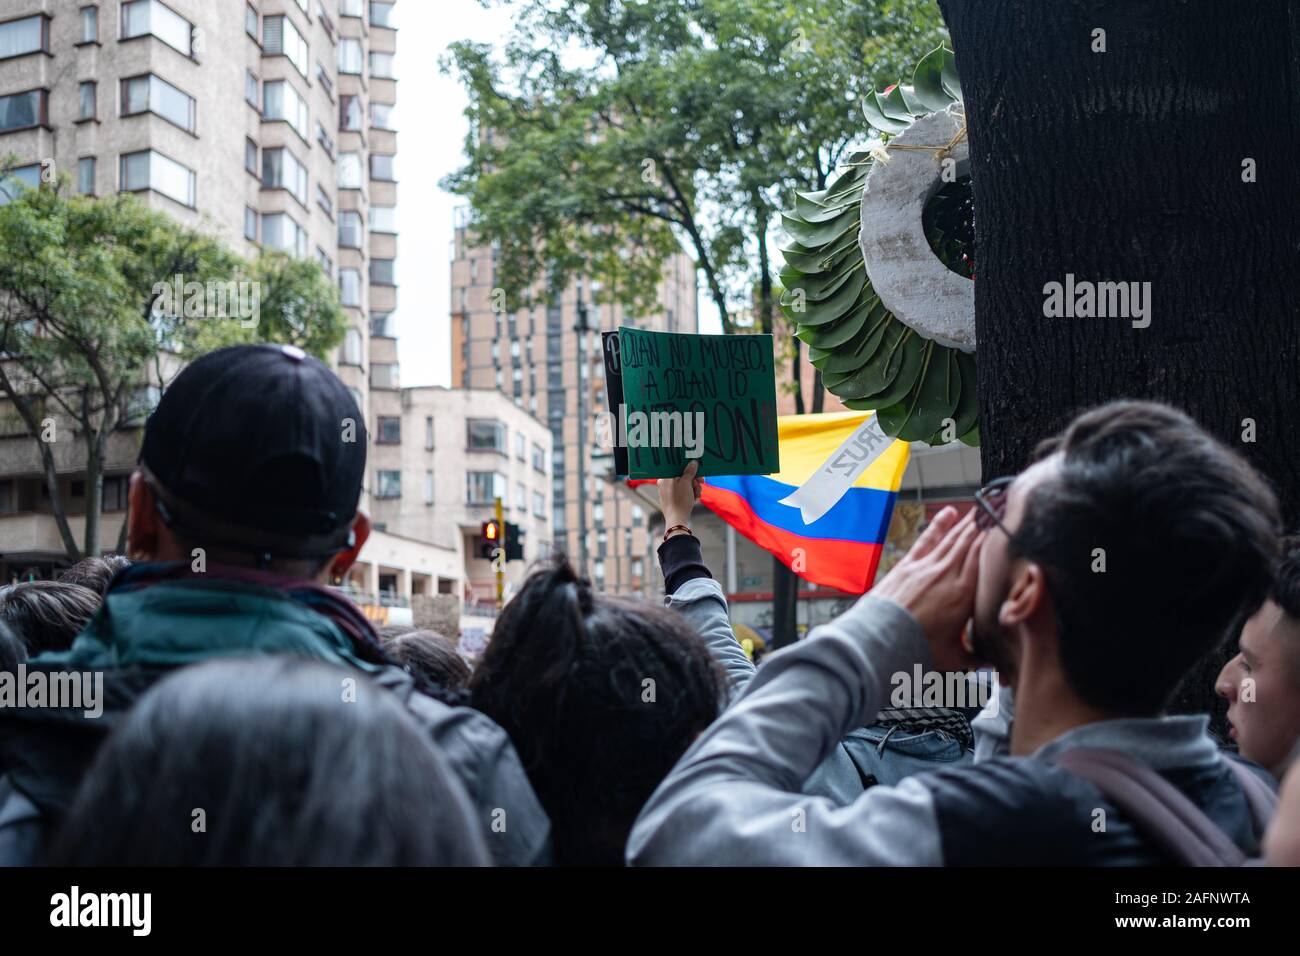 Students and protesters returned to the street where Dilan Cruz was shot a few days before to commemorate his death. Stock Photo